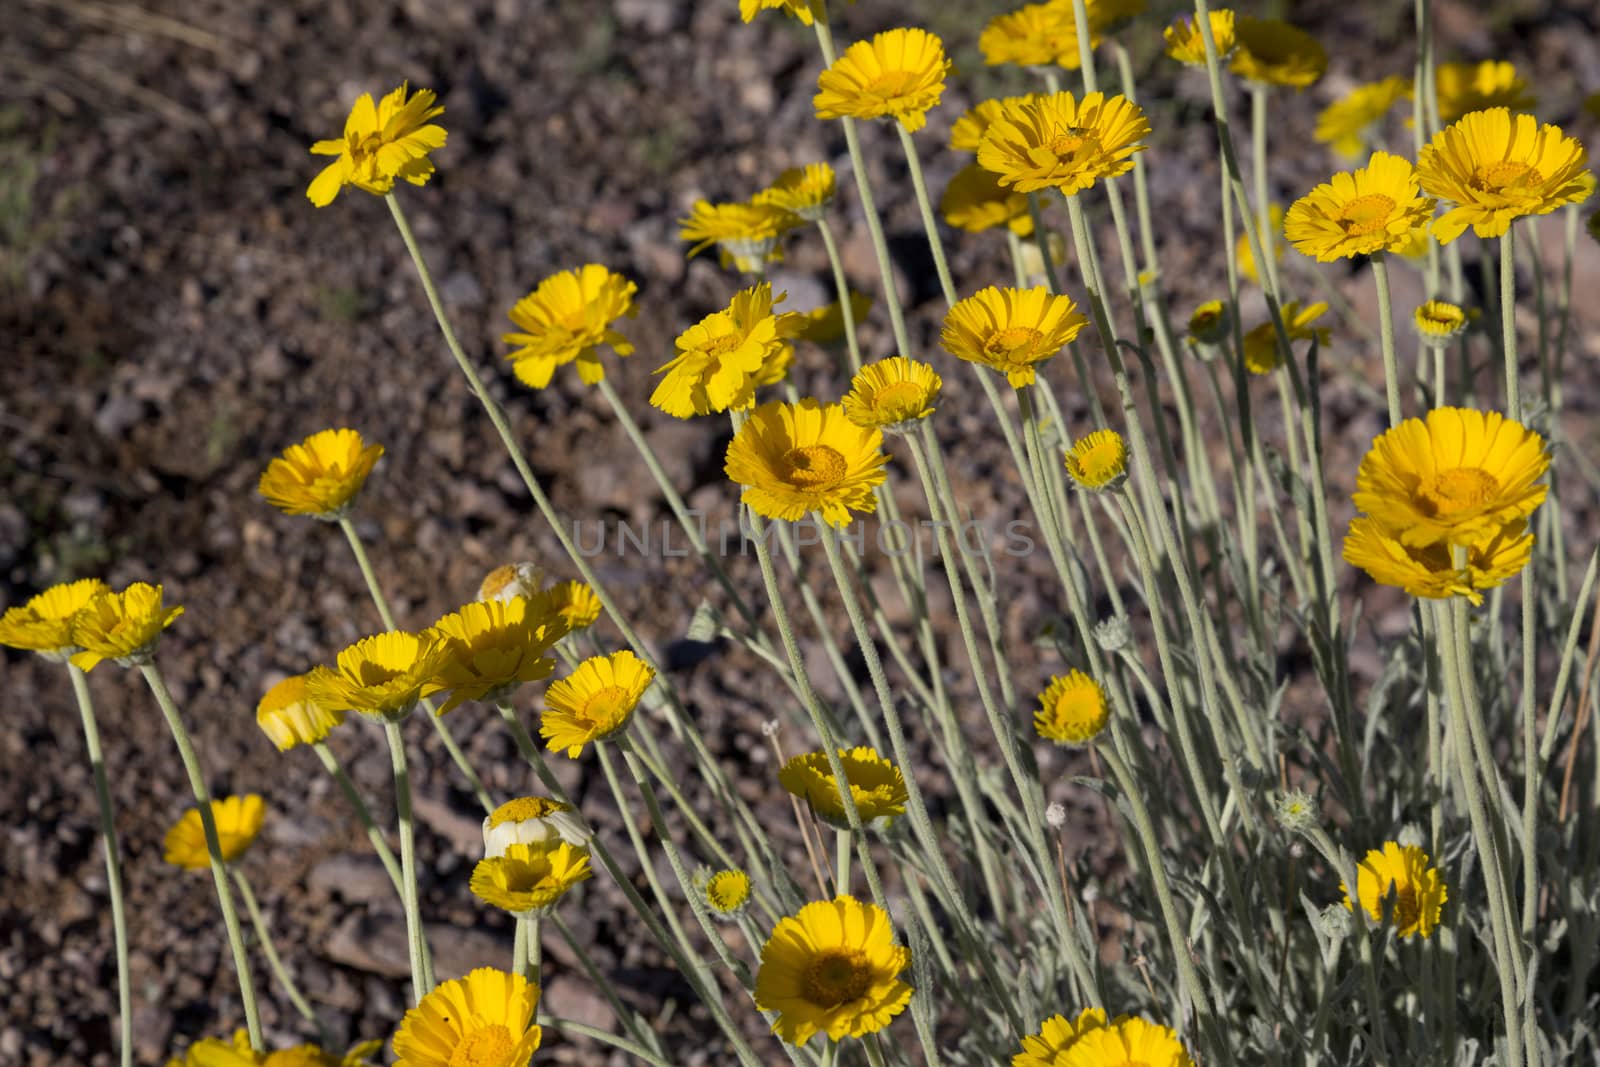 Desert marigold in Arizona, America's Southwest.  Location is Picacho Peak State Park on March 10, 2017. Spring wildflowers on arid lands are a tourism attraction. 